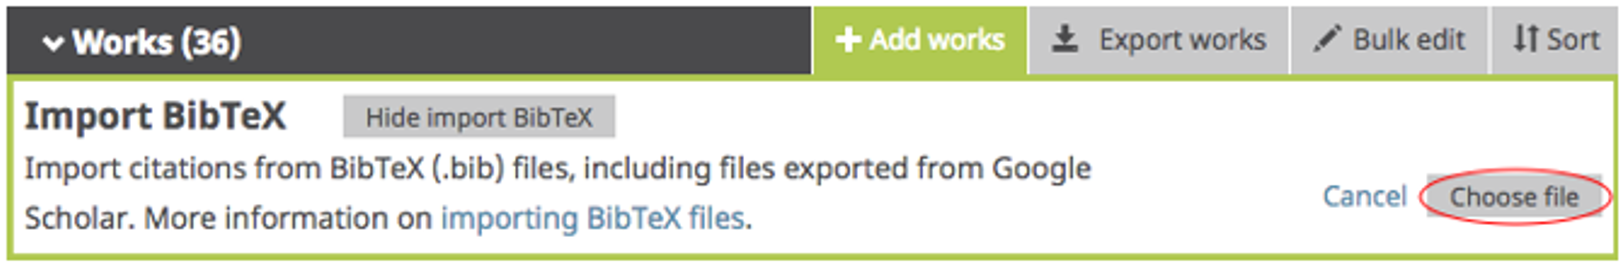 Screen capture of ORCID user page with 'Choose file' circled.